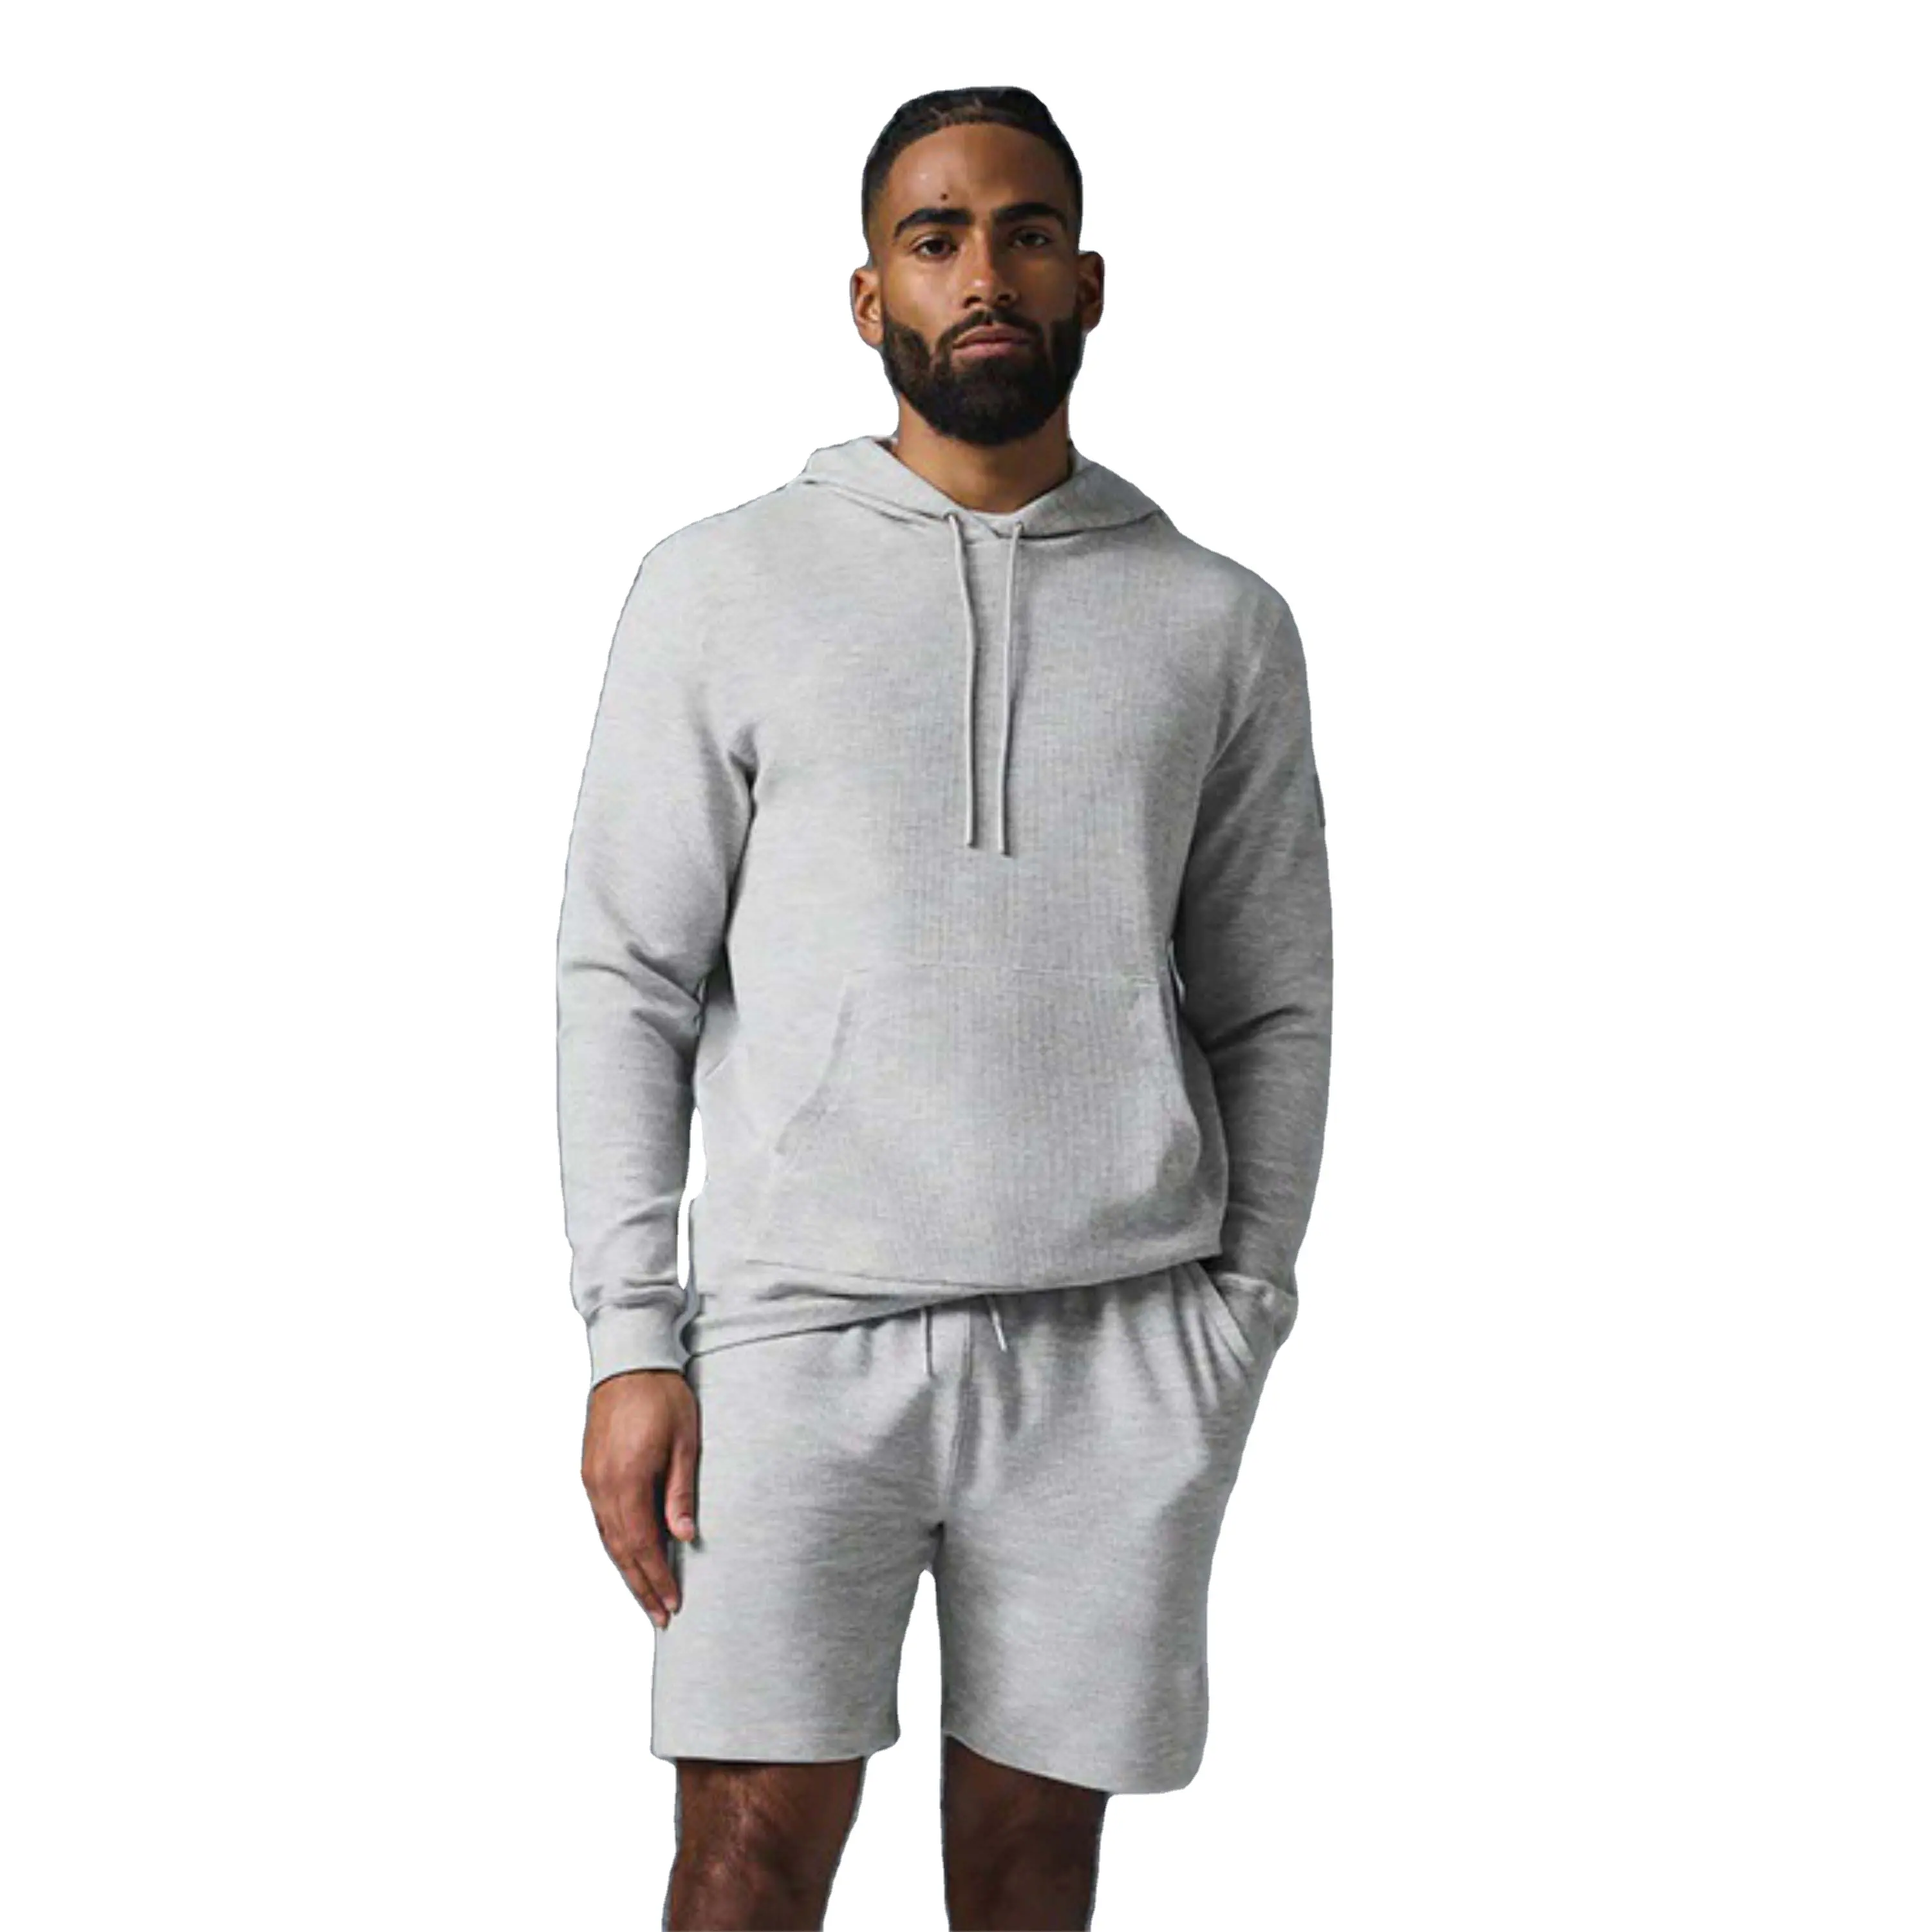 Men's Soft Cotton Fleece Pullover Hoodie - Perfect for Casual Wear with Warm Kangaroo Pocket and Adjustable Drawstrings